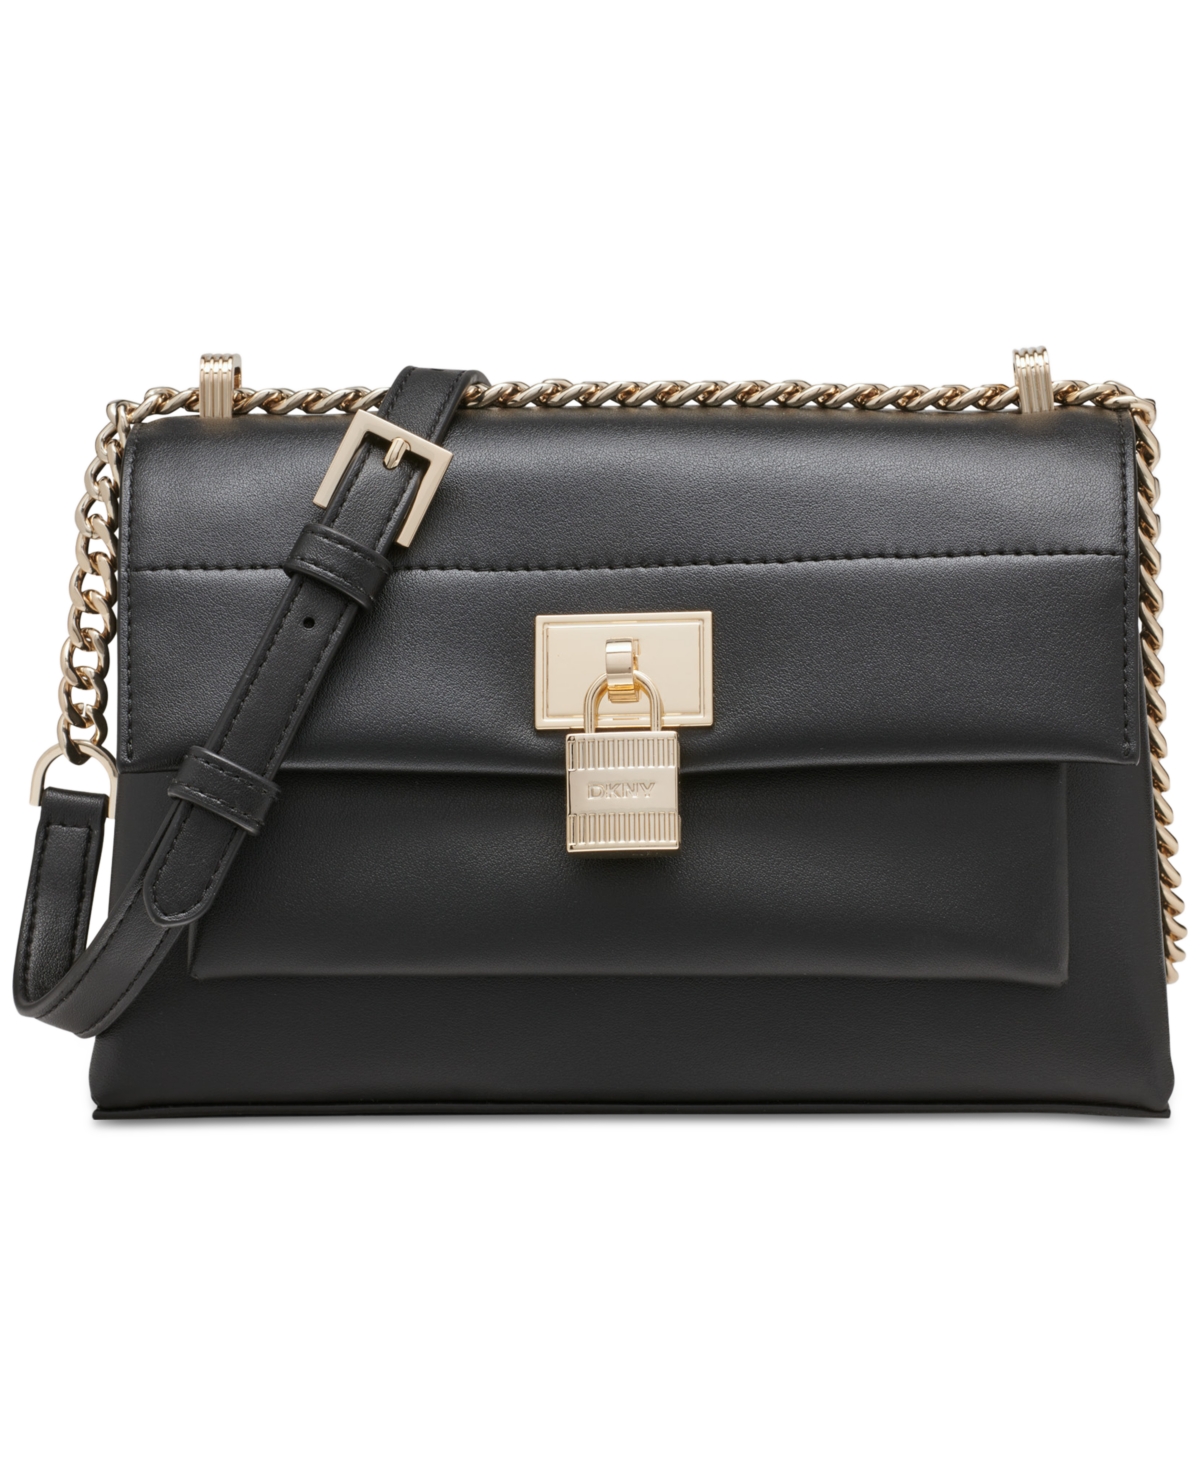 Evie Small Leather Flap Crossbody - Black/Gold